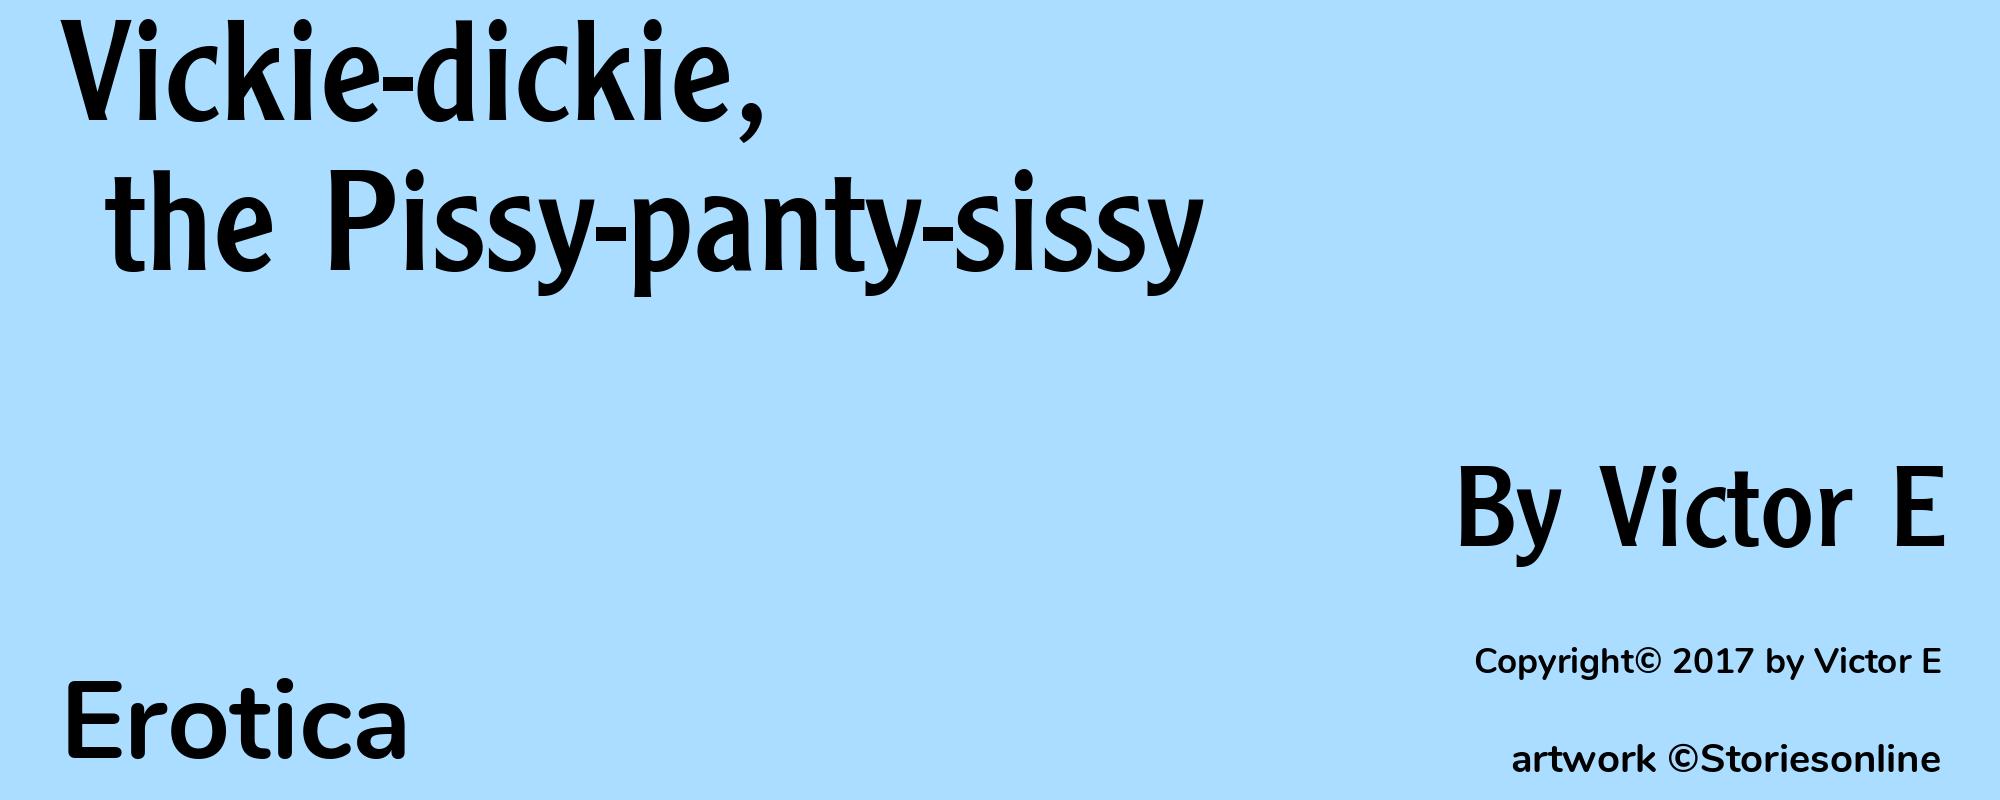 Vickie-dickie, the Pissy-panty-sissy - Cover